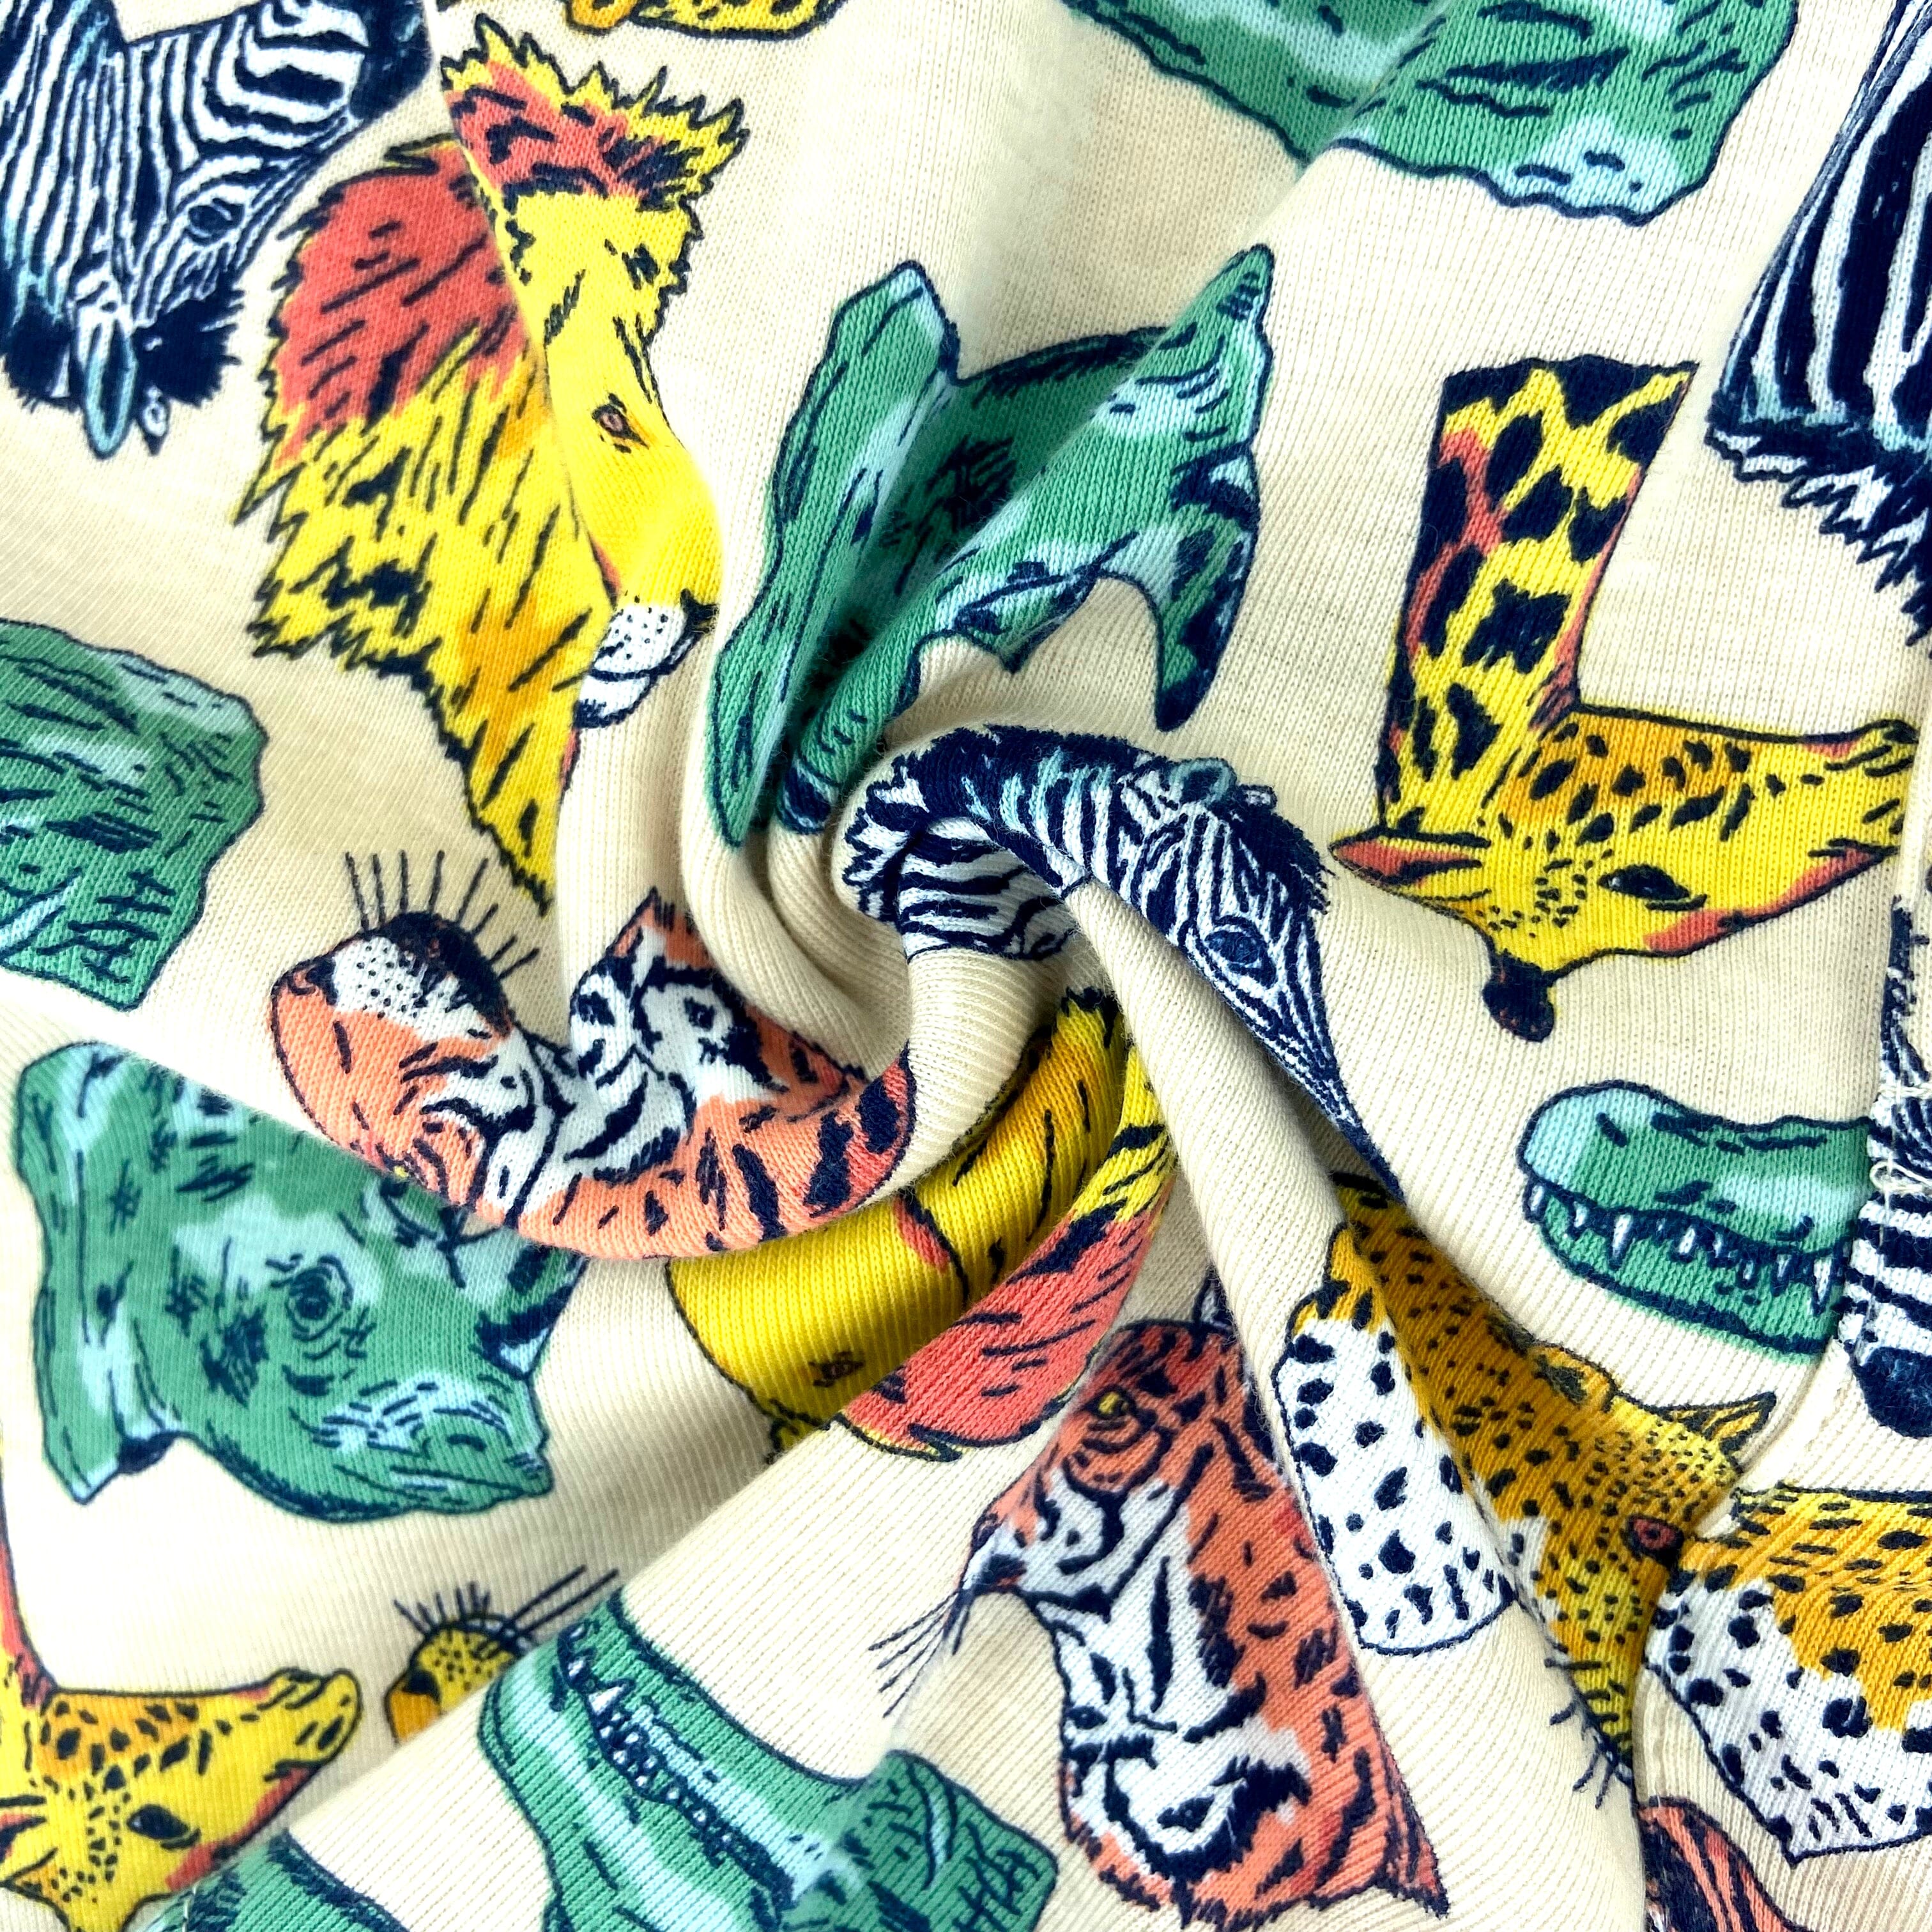 Buy Cool Animal Boxers Shorts. Tigers, Lions, Zebras & More 